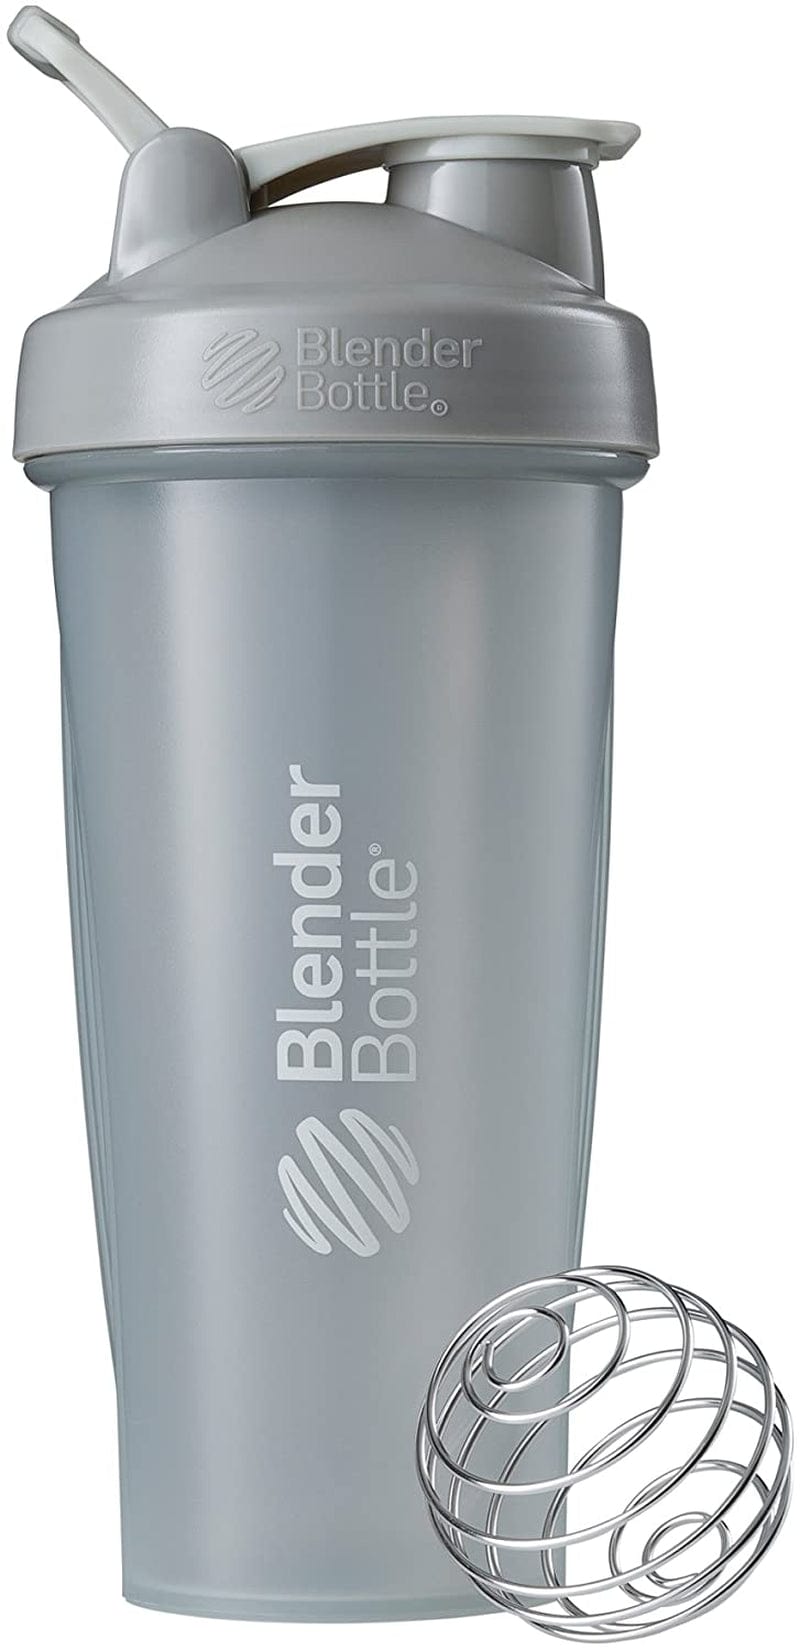 Blenderbottle Classic Shaker Bottle Perfect for Protein Shakes and Pre Workout, 20-Ounce, Clear/Black/Black & Classic V2 Shaker Bottle Perfect for Protein Shakes and Pre Workout, 28-Ounce, Black Home & Garden > Kitchen & Dining > Barware BlenderBottle Pebble Gray Bottle 28-Ounce